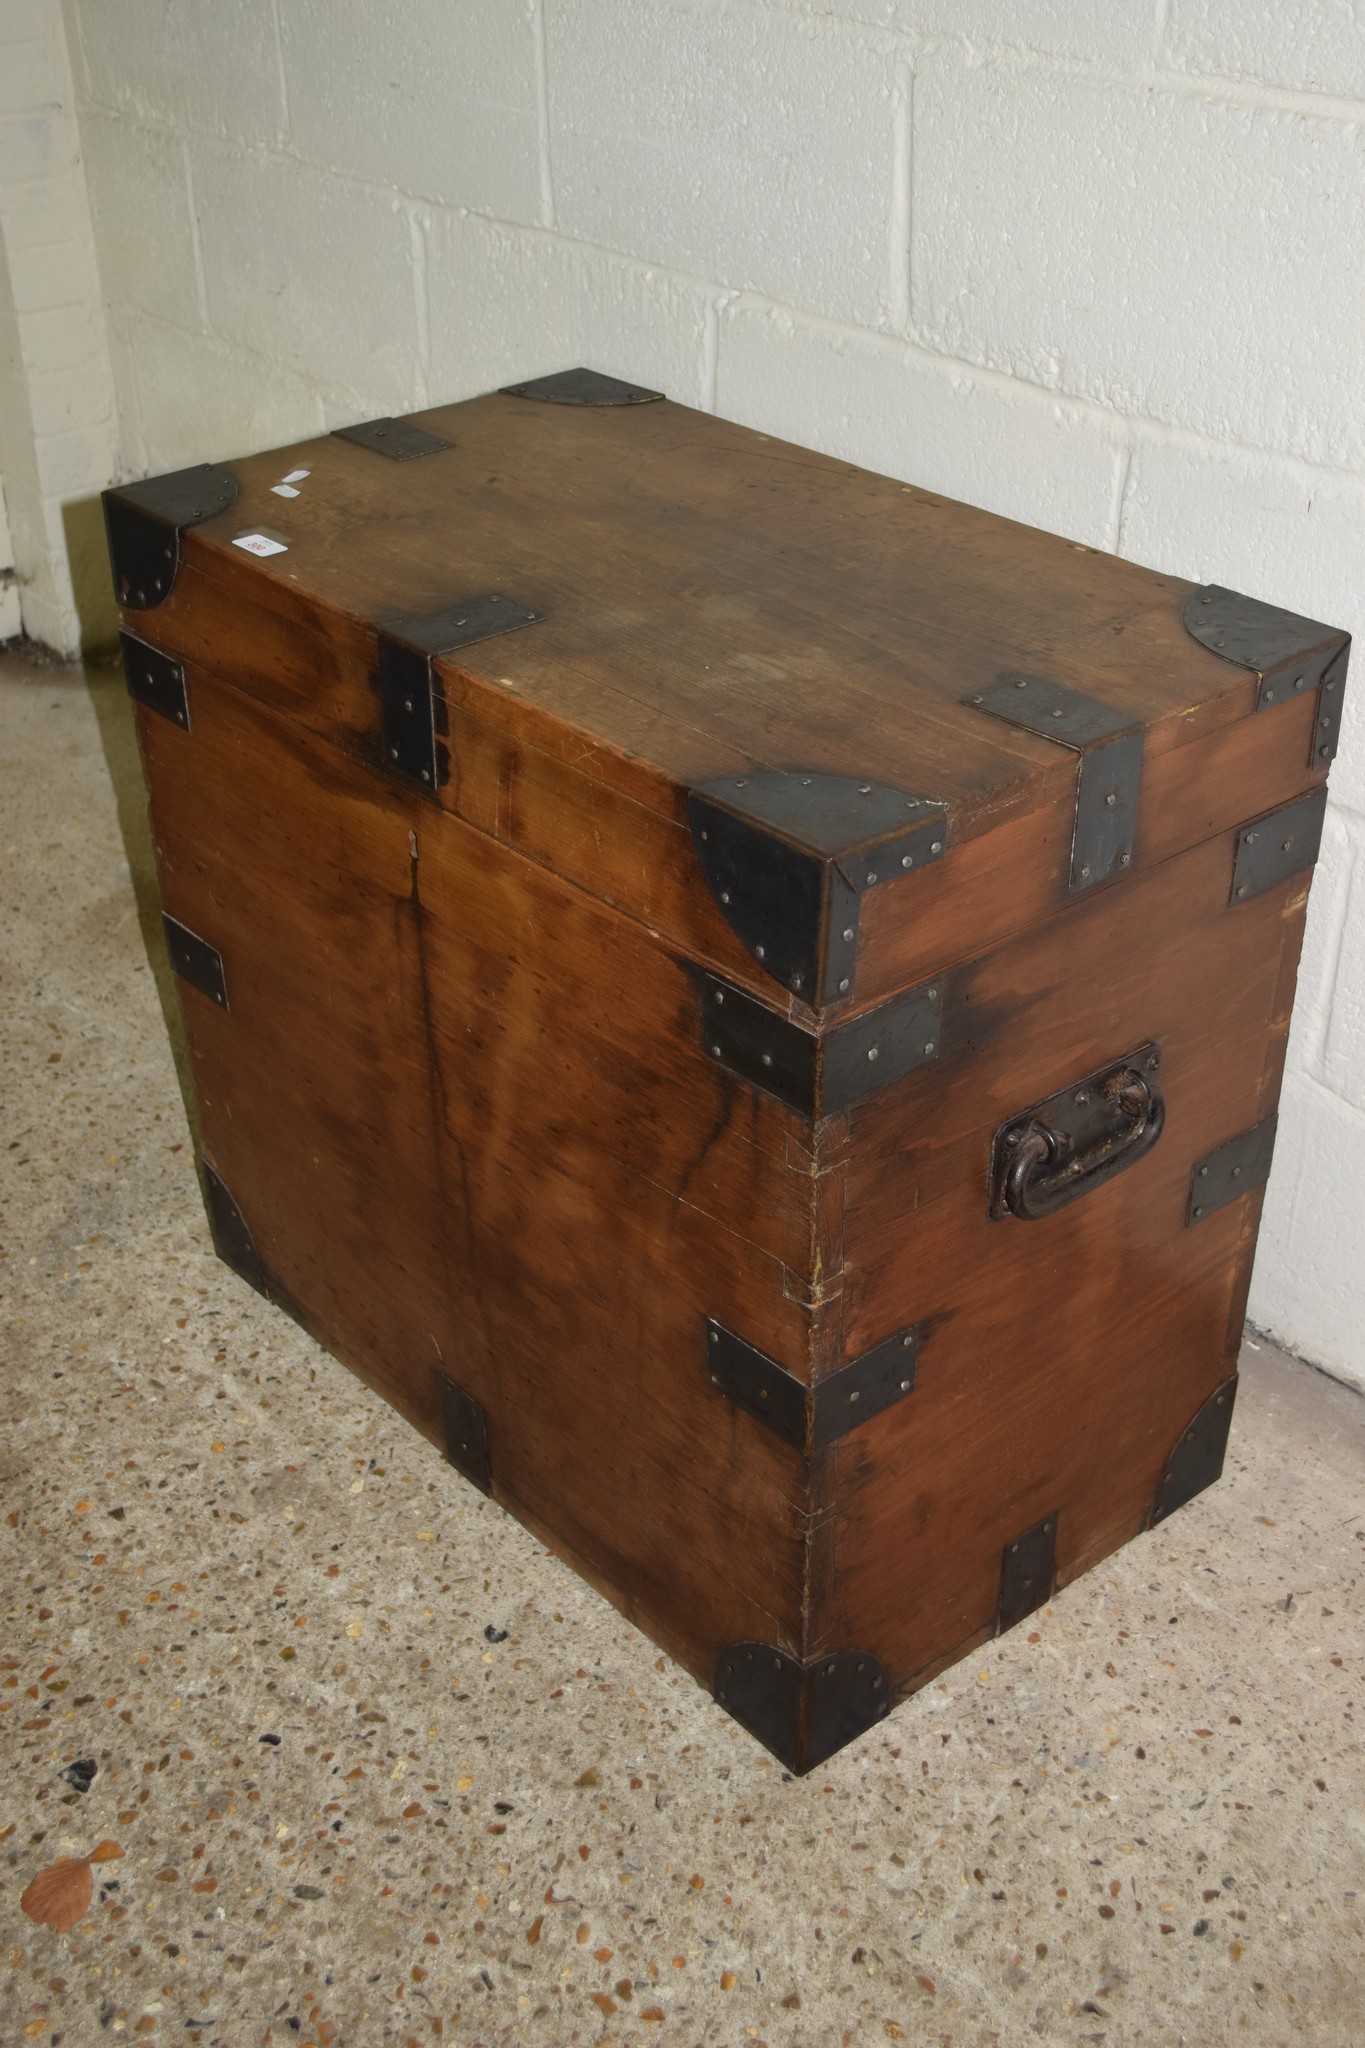 REPRODUCTION HARDWOOD STORAGE CHEST WITH METAL TRIM, APPROX LENGTH 74CM - Image 2 of 3